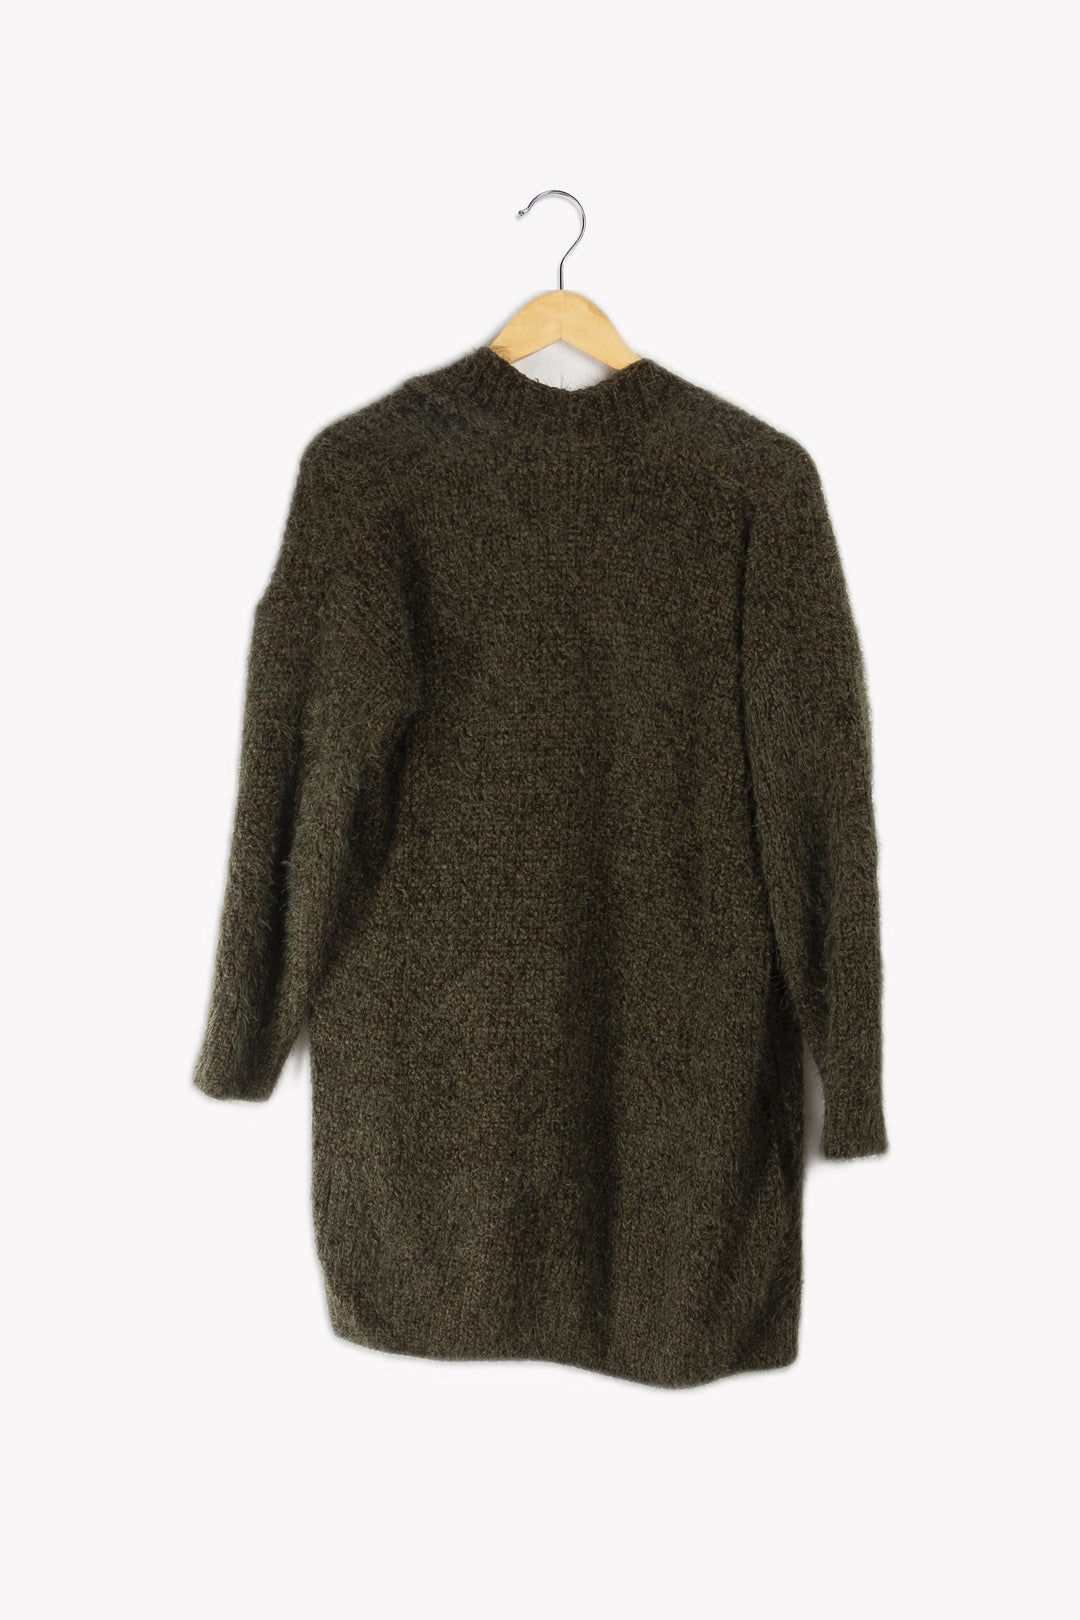 Mid-length chenille knit cardigan - XS/34